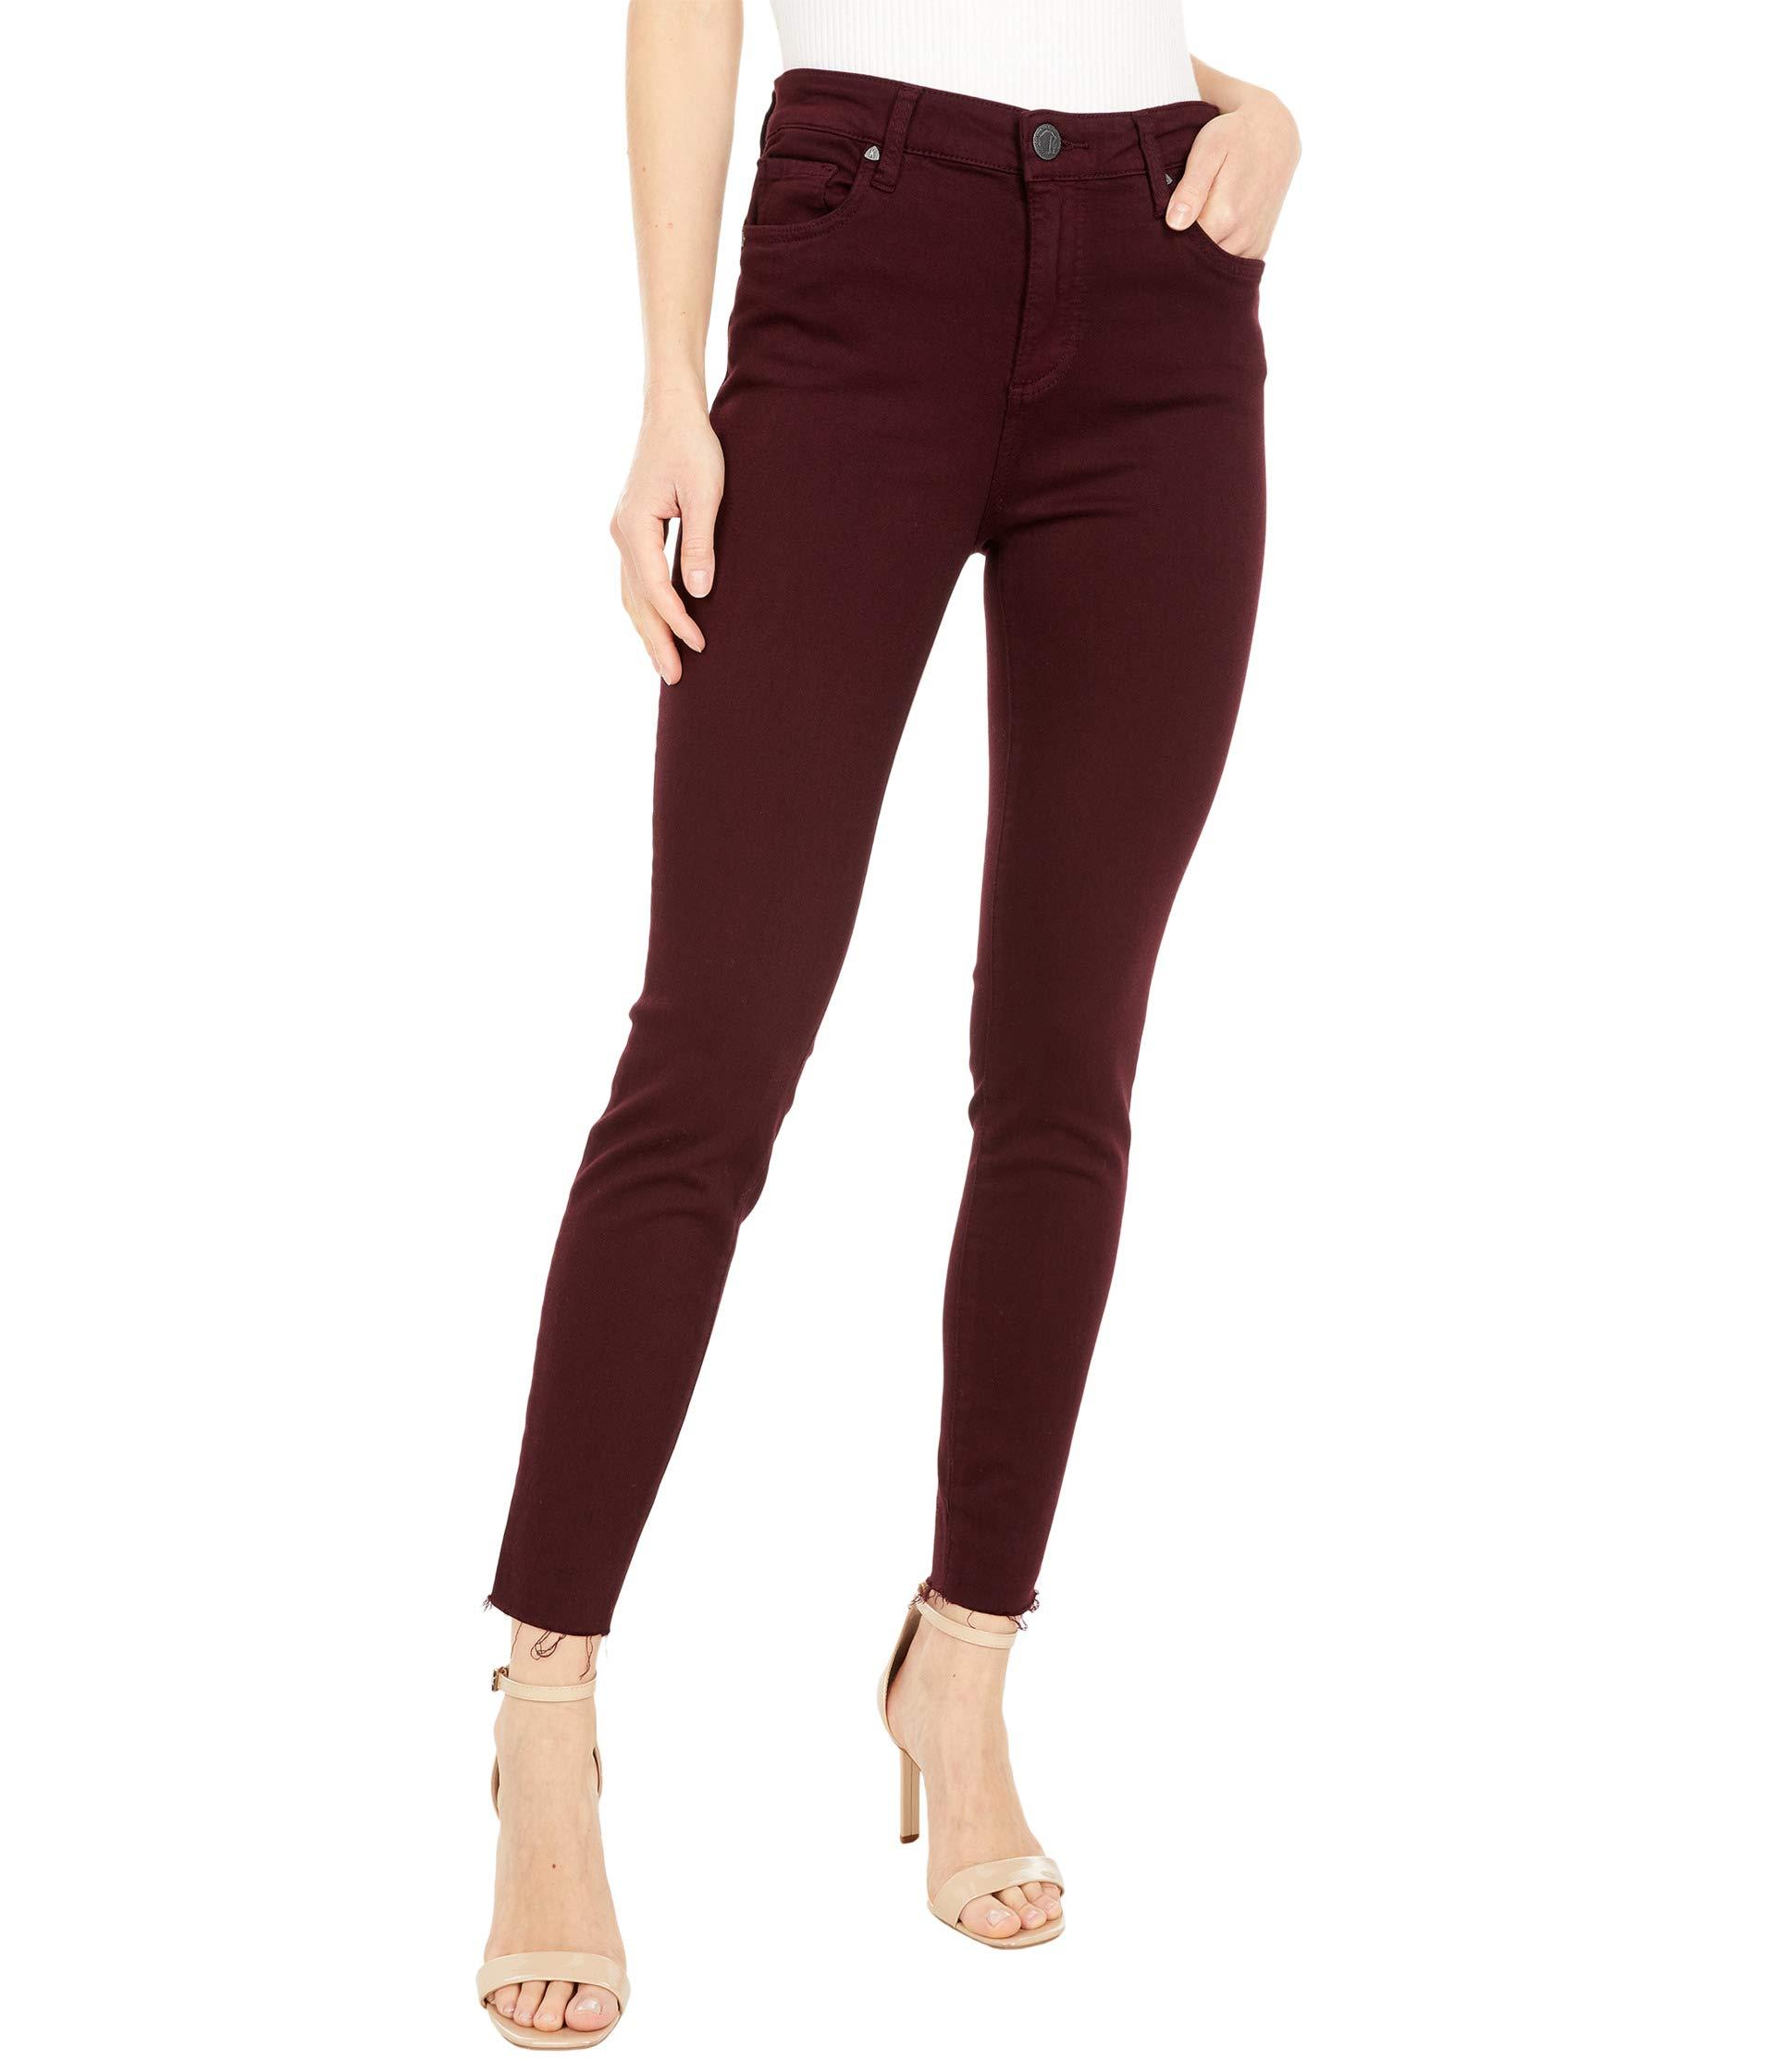 KUT from the Kloth Womens Donna Ankle Skinny Jeans in Deep Plum 